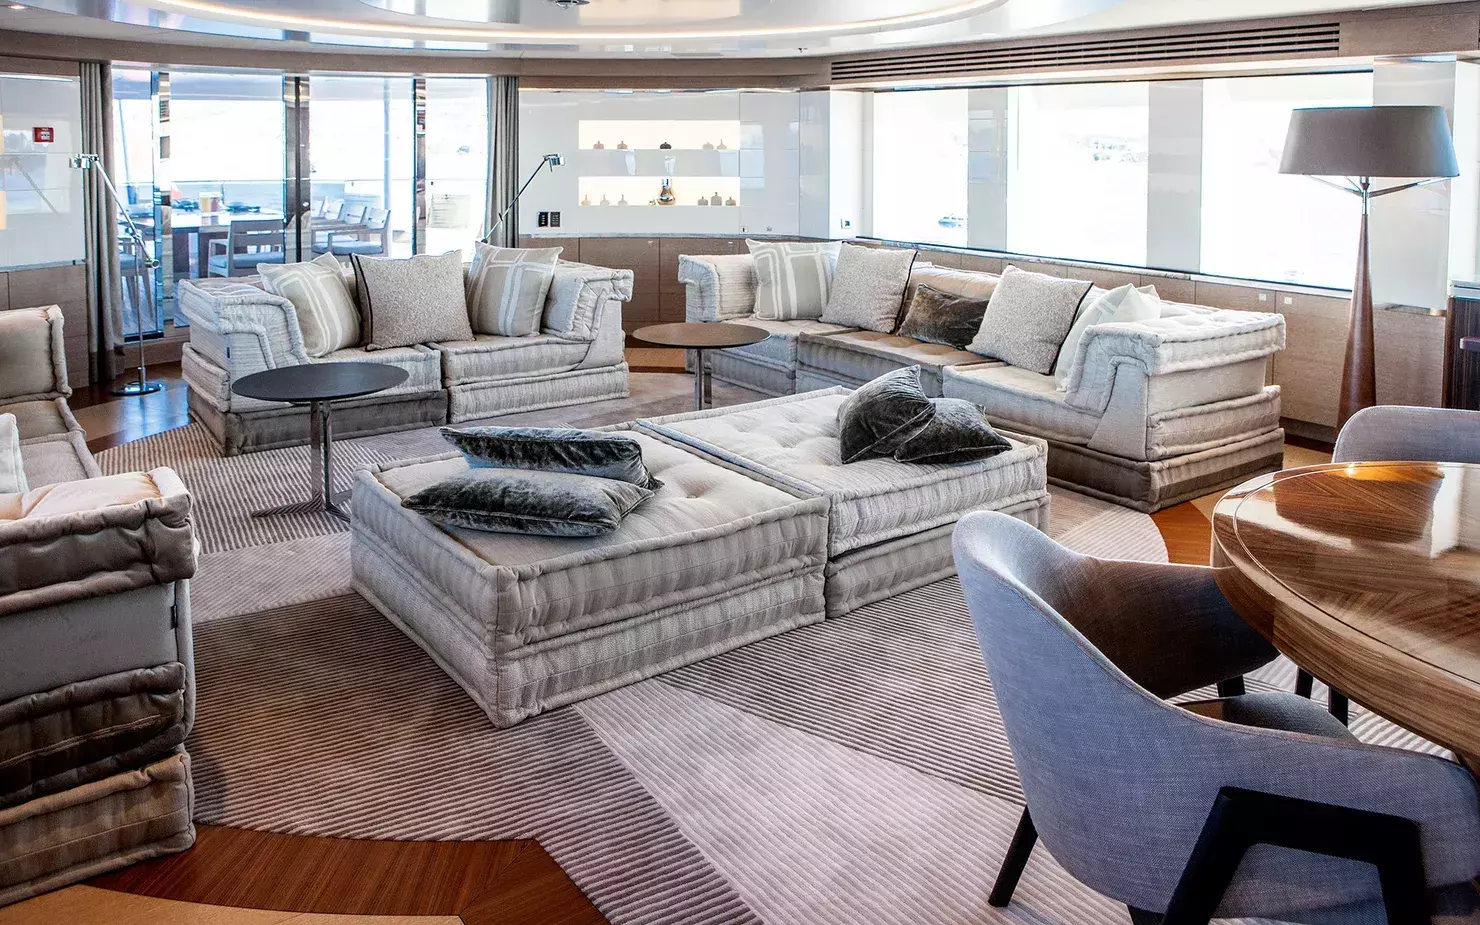 Asya by Heesen - Special Offer for a private Superyacht Charter in Cannes with a crew